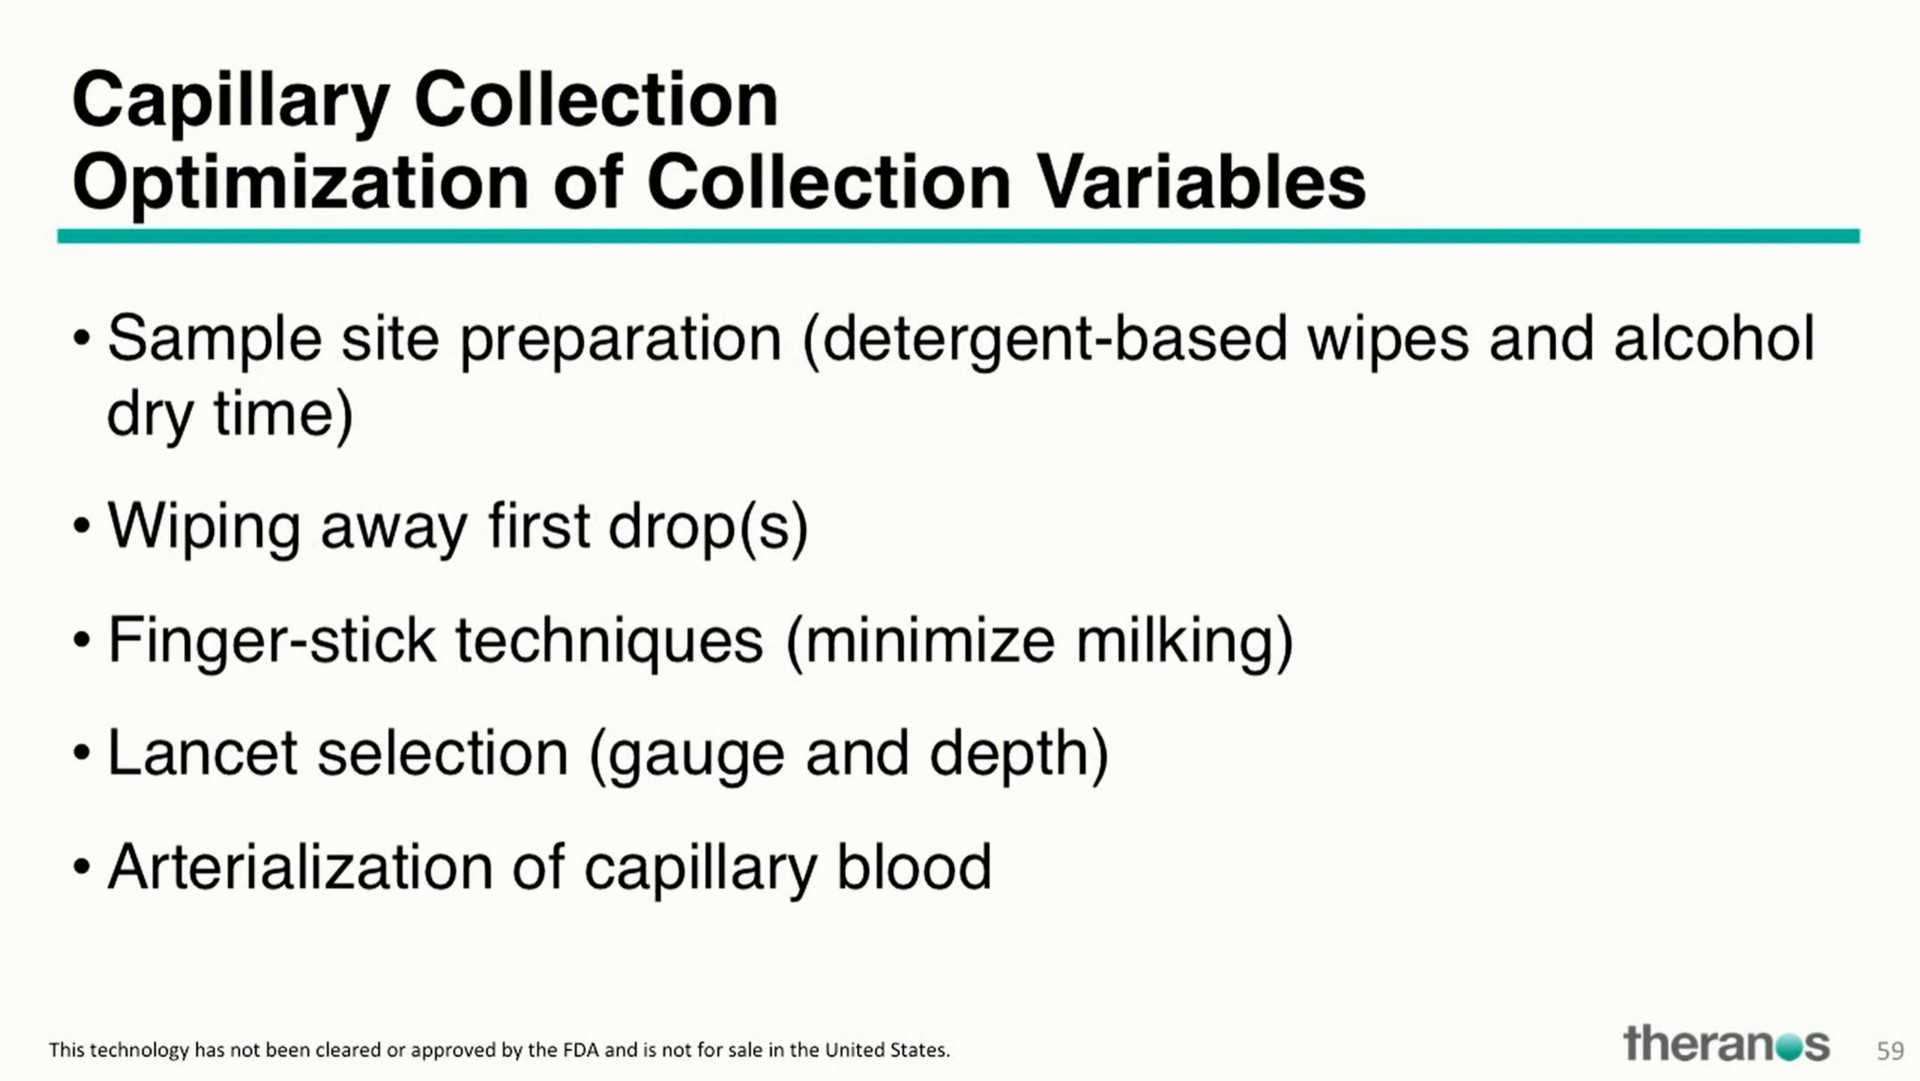 capillary collection optimization of collection variables | Theranos